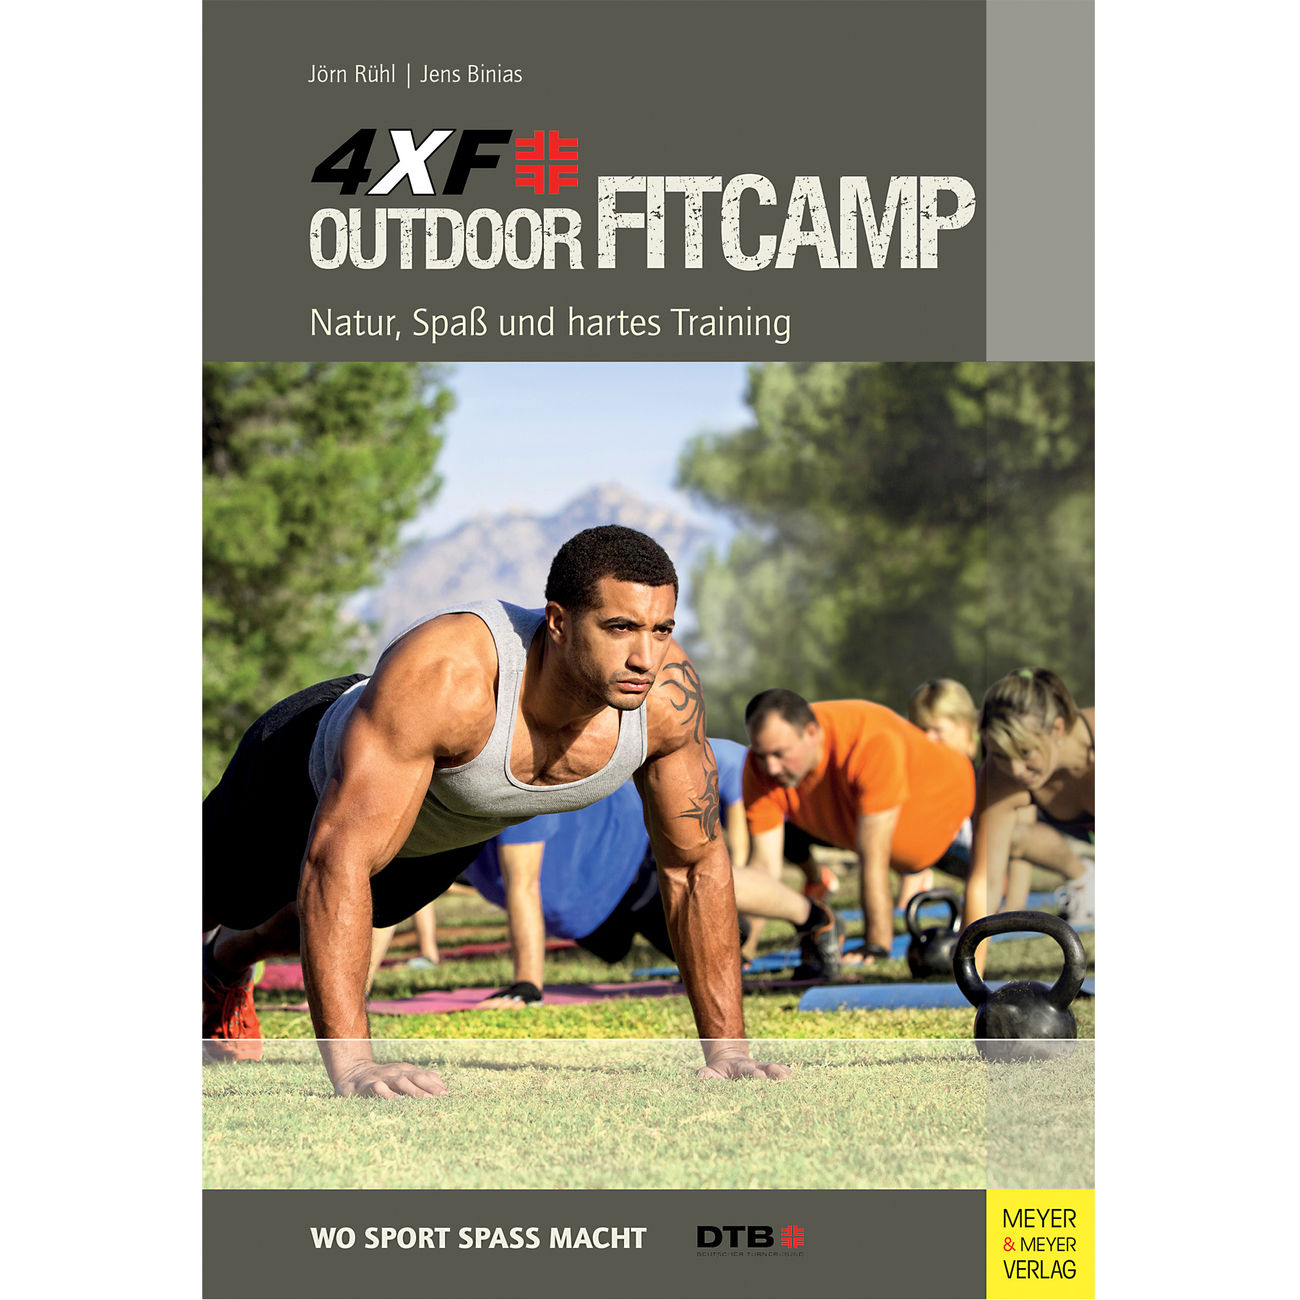 4xF Outdoor Fitcamp - Natur, Spa und hartes Training